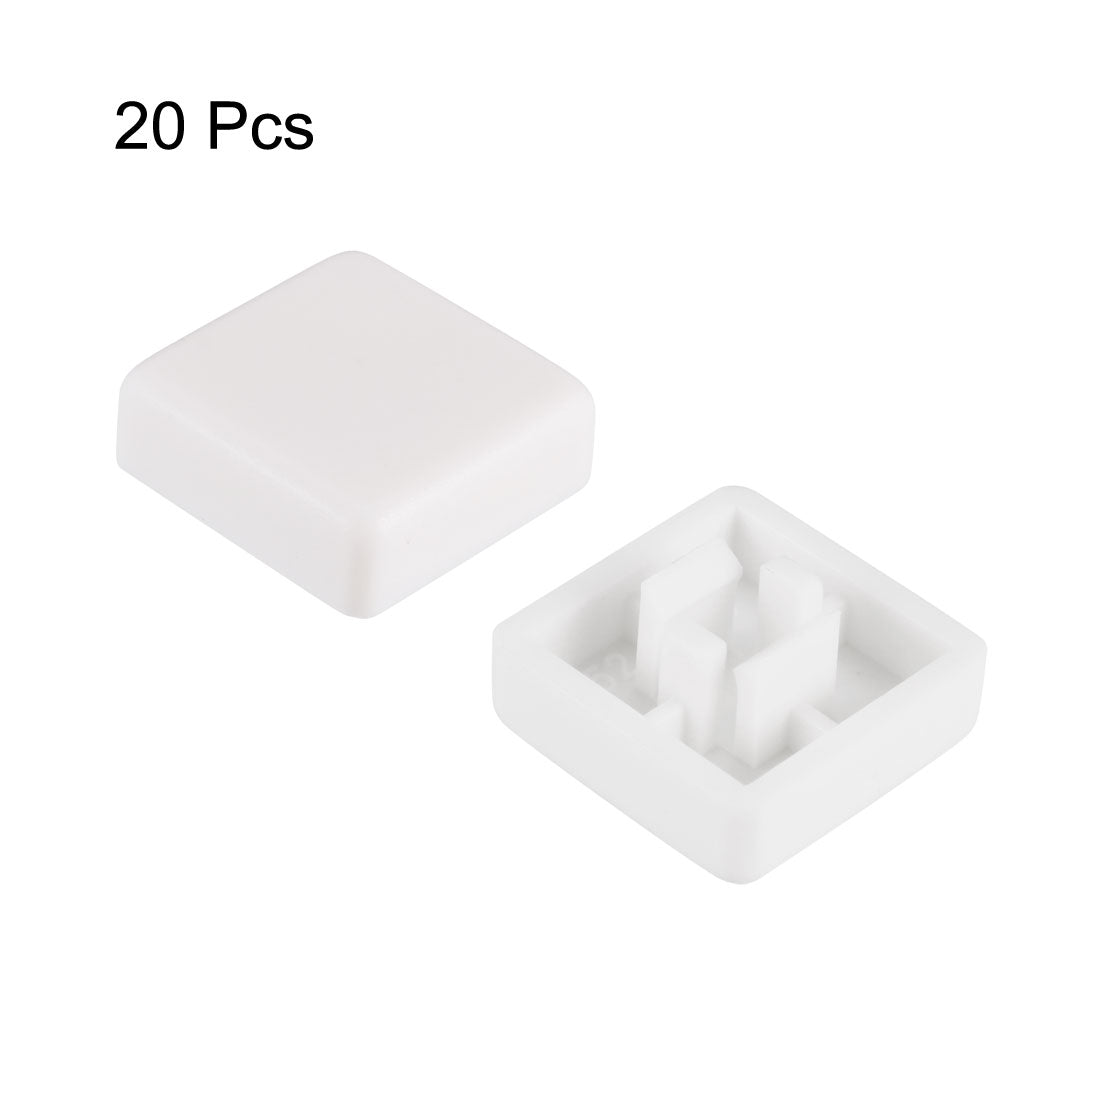 uxcell Uxcell 20Pcs Plastic 12x12mm Pushbutton Tactile Switch Caps Cover Keycaps White for 12x12x7.3mm Tact Switch